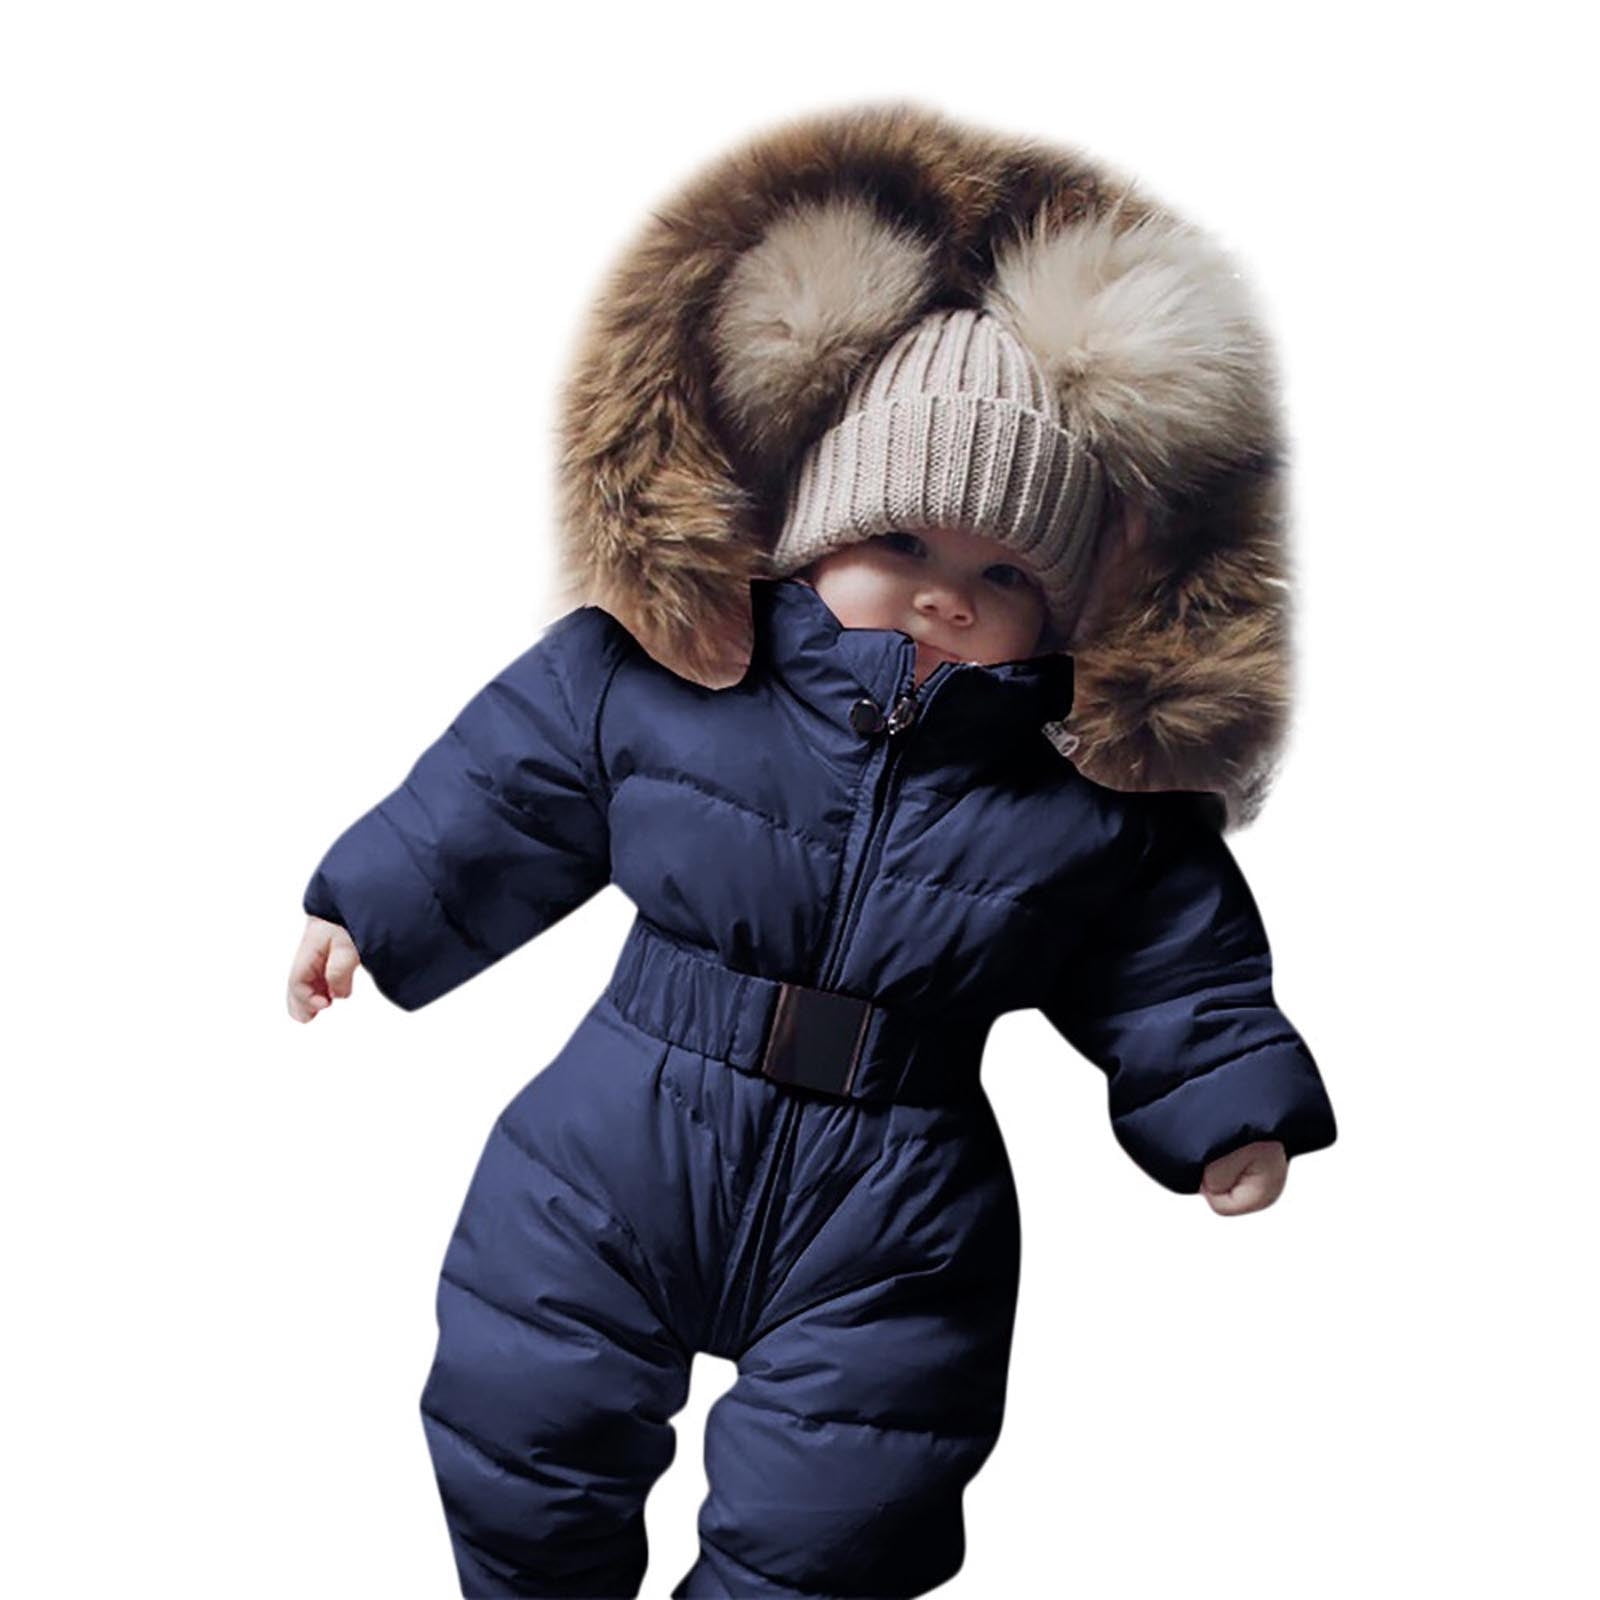 Details about   Toddler Baby Boys Denim Winter Coat Outerwear kids Boys Jacket Clothes 